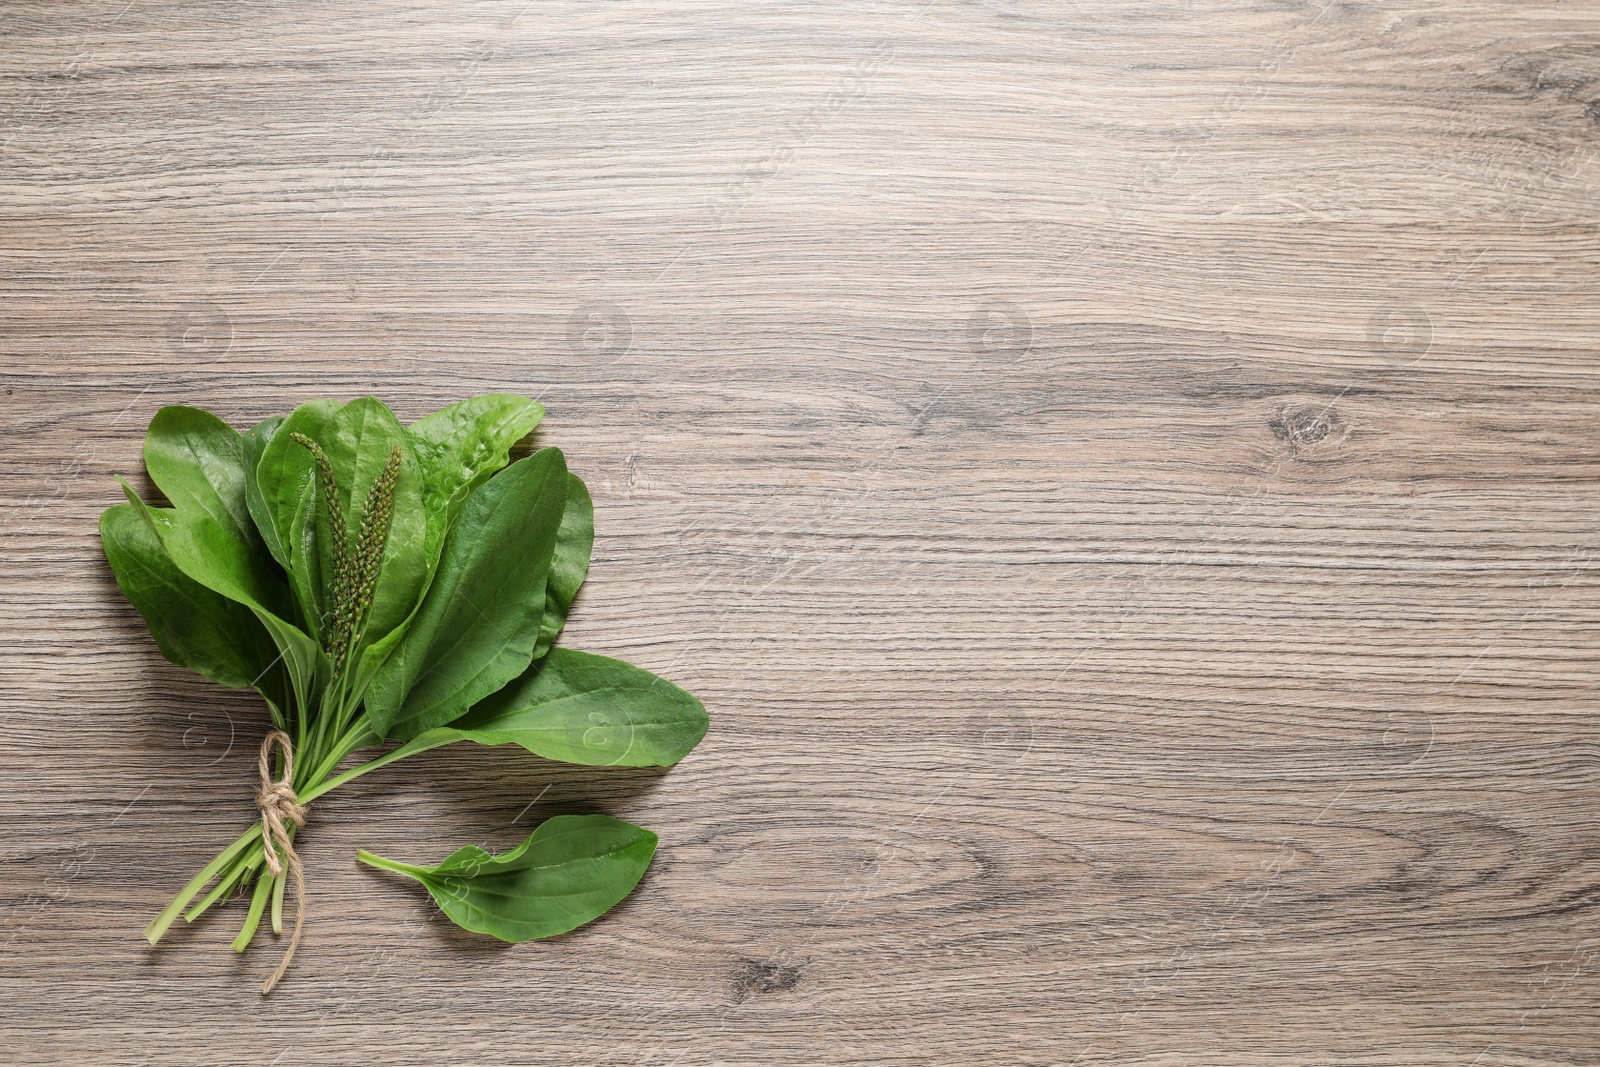 Photo of Green broadleaf plantain leaves on wooden table, top view. Space for text